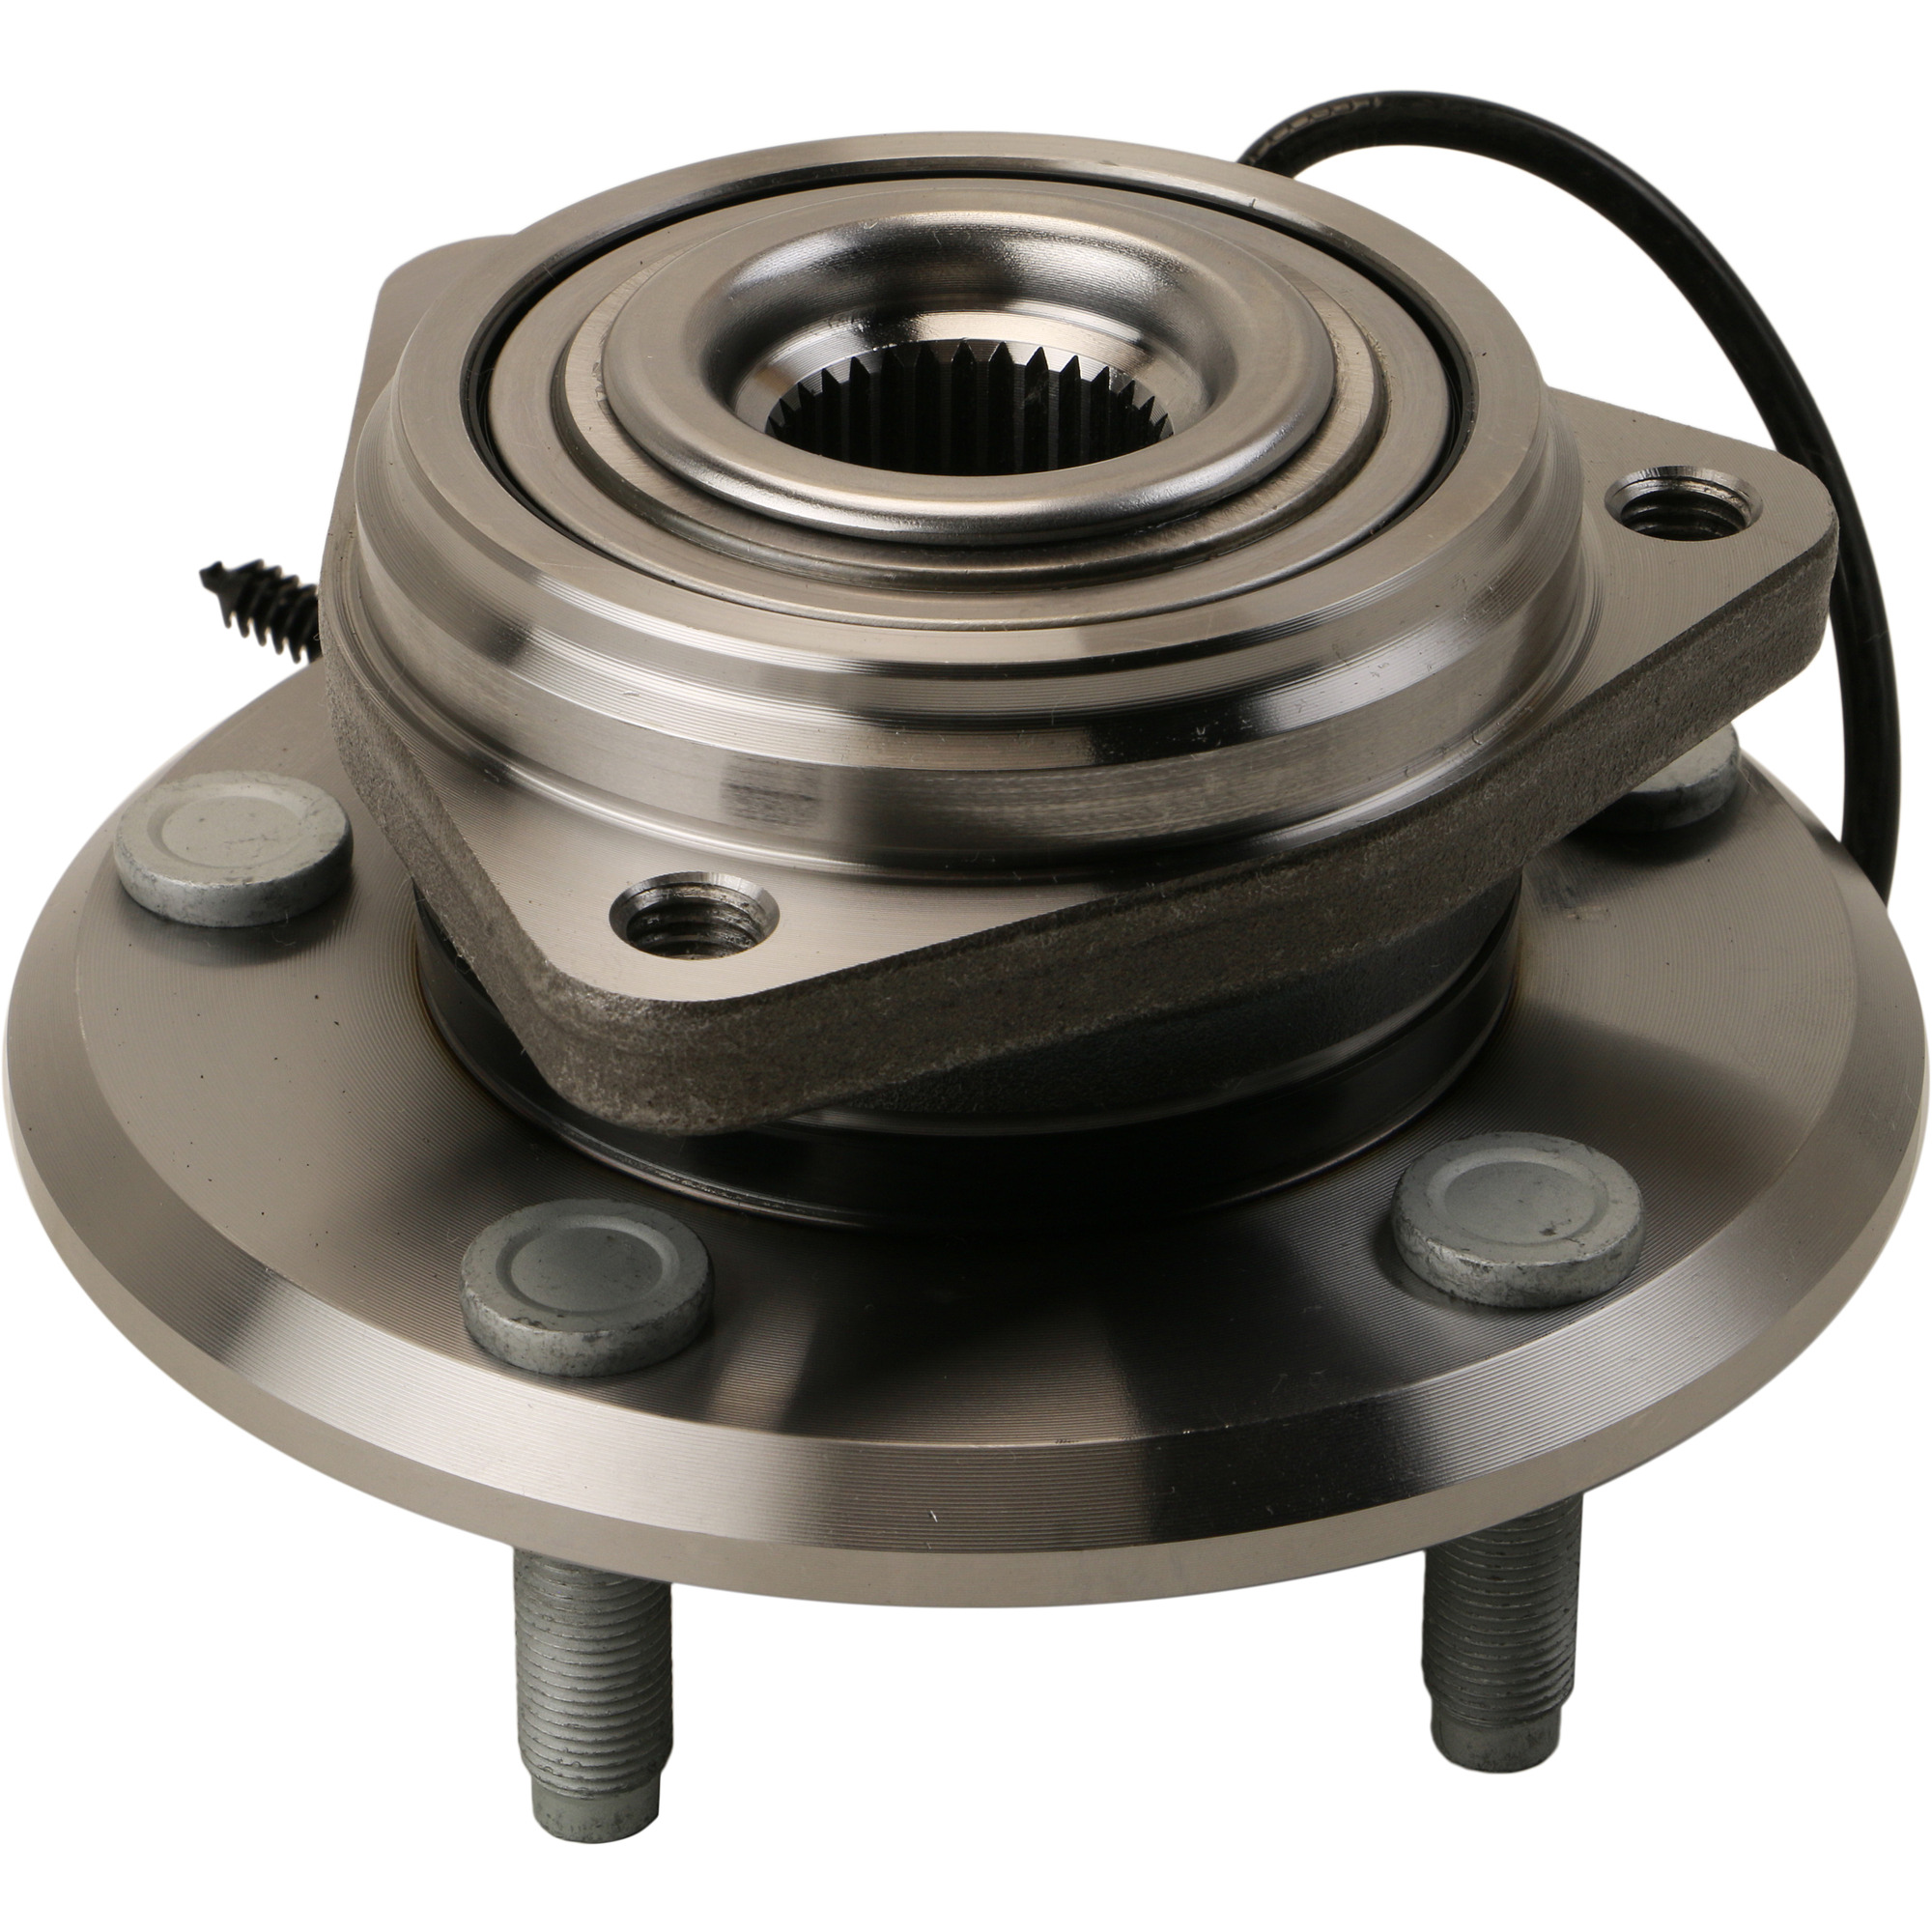 MOOG 513369 Wheel Bearing and Hub Assembly Fits select: 2015-2018 JEEP WRANGLER UNLIMITED, 2012-2014 JEEP WRANGLER - image 1 of 5